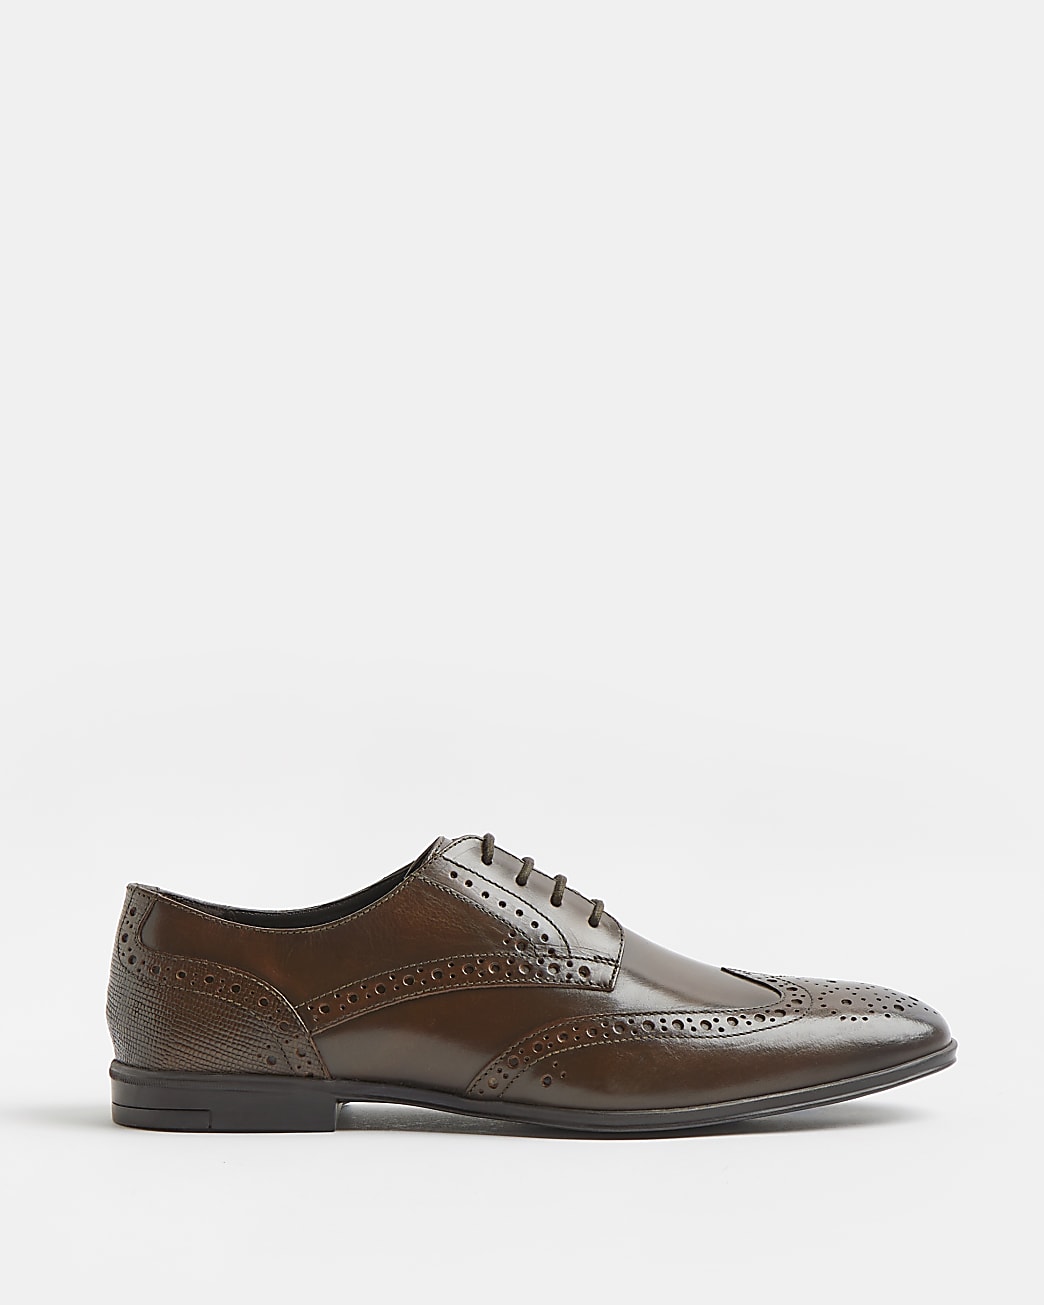 RIVER ISLAND BROWN LACE UP LEATHER BROGUE DERBY SHOES